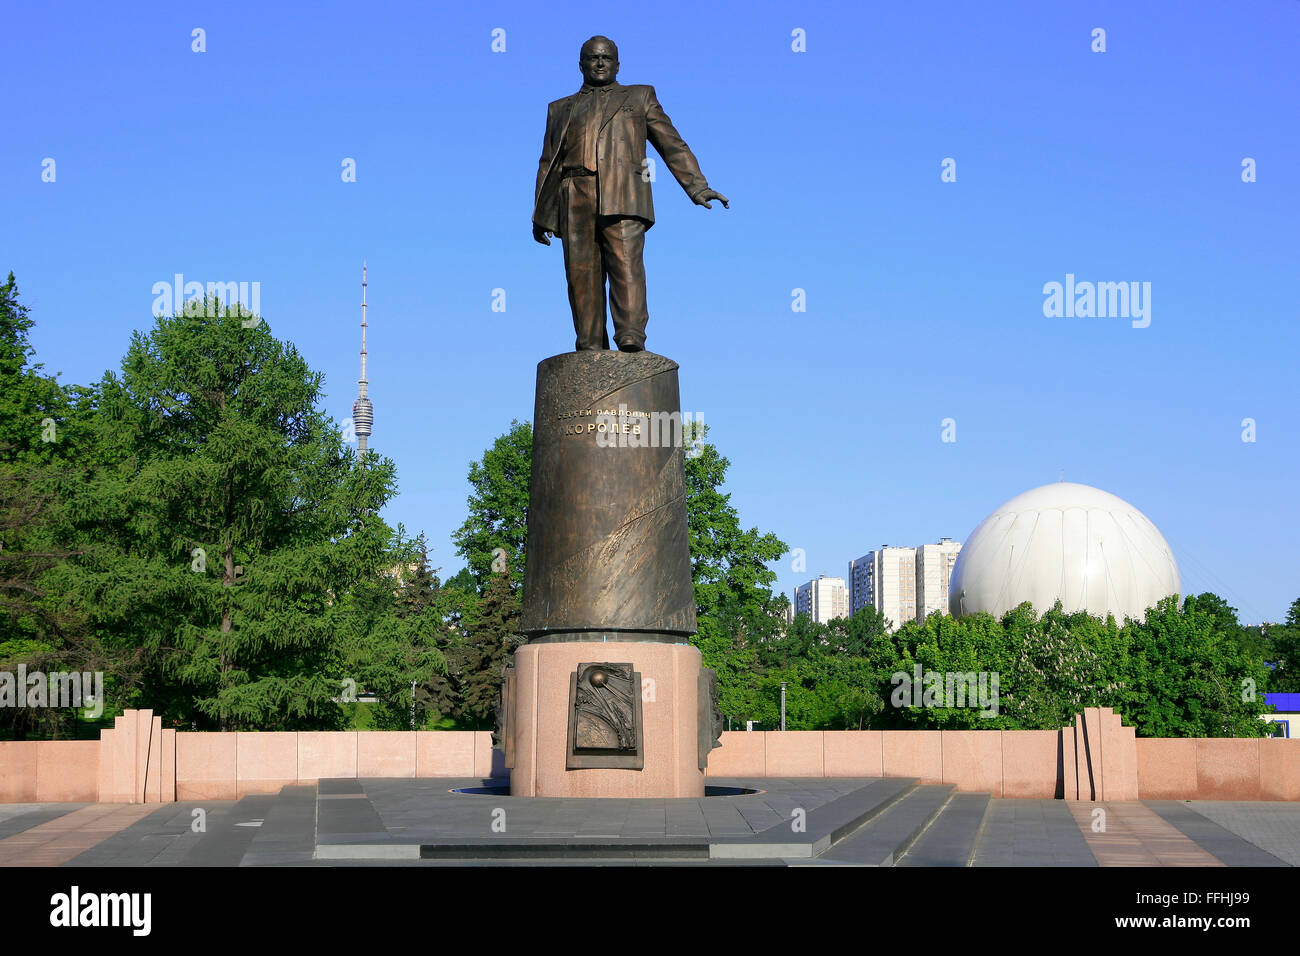 Monument to the lead Soviet rocket engineer and spacecraft designer Sergei Pavlovich Korolev (1907-1966) in Moscow, Russia Stock Photo